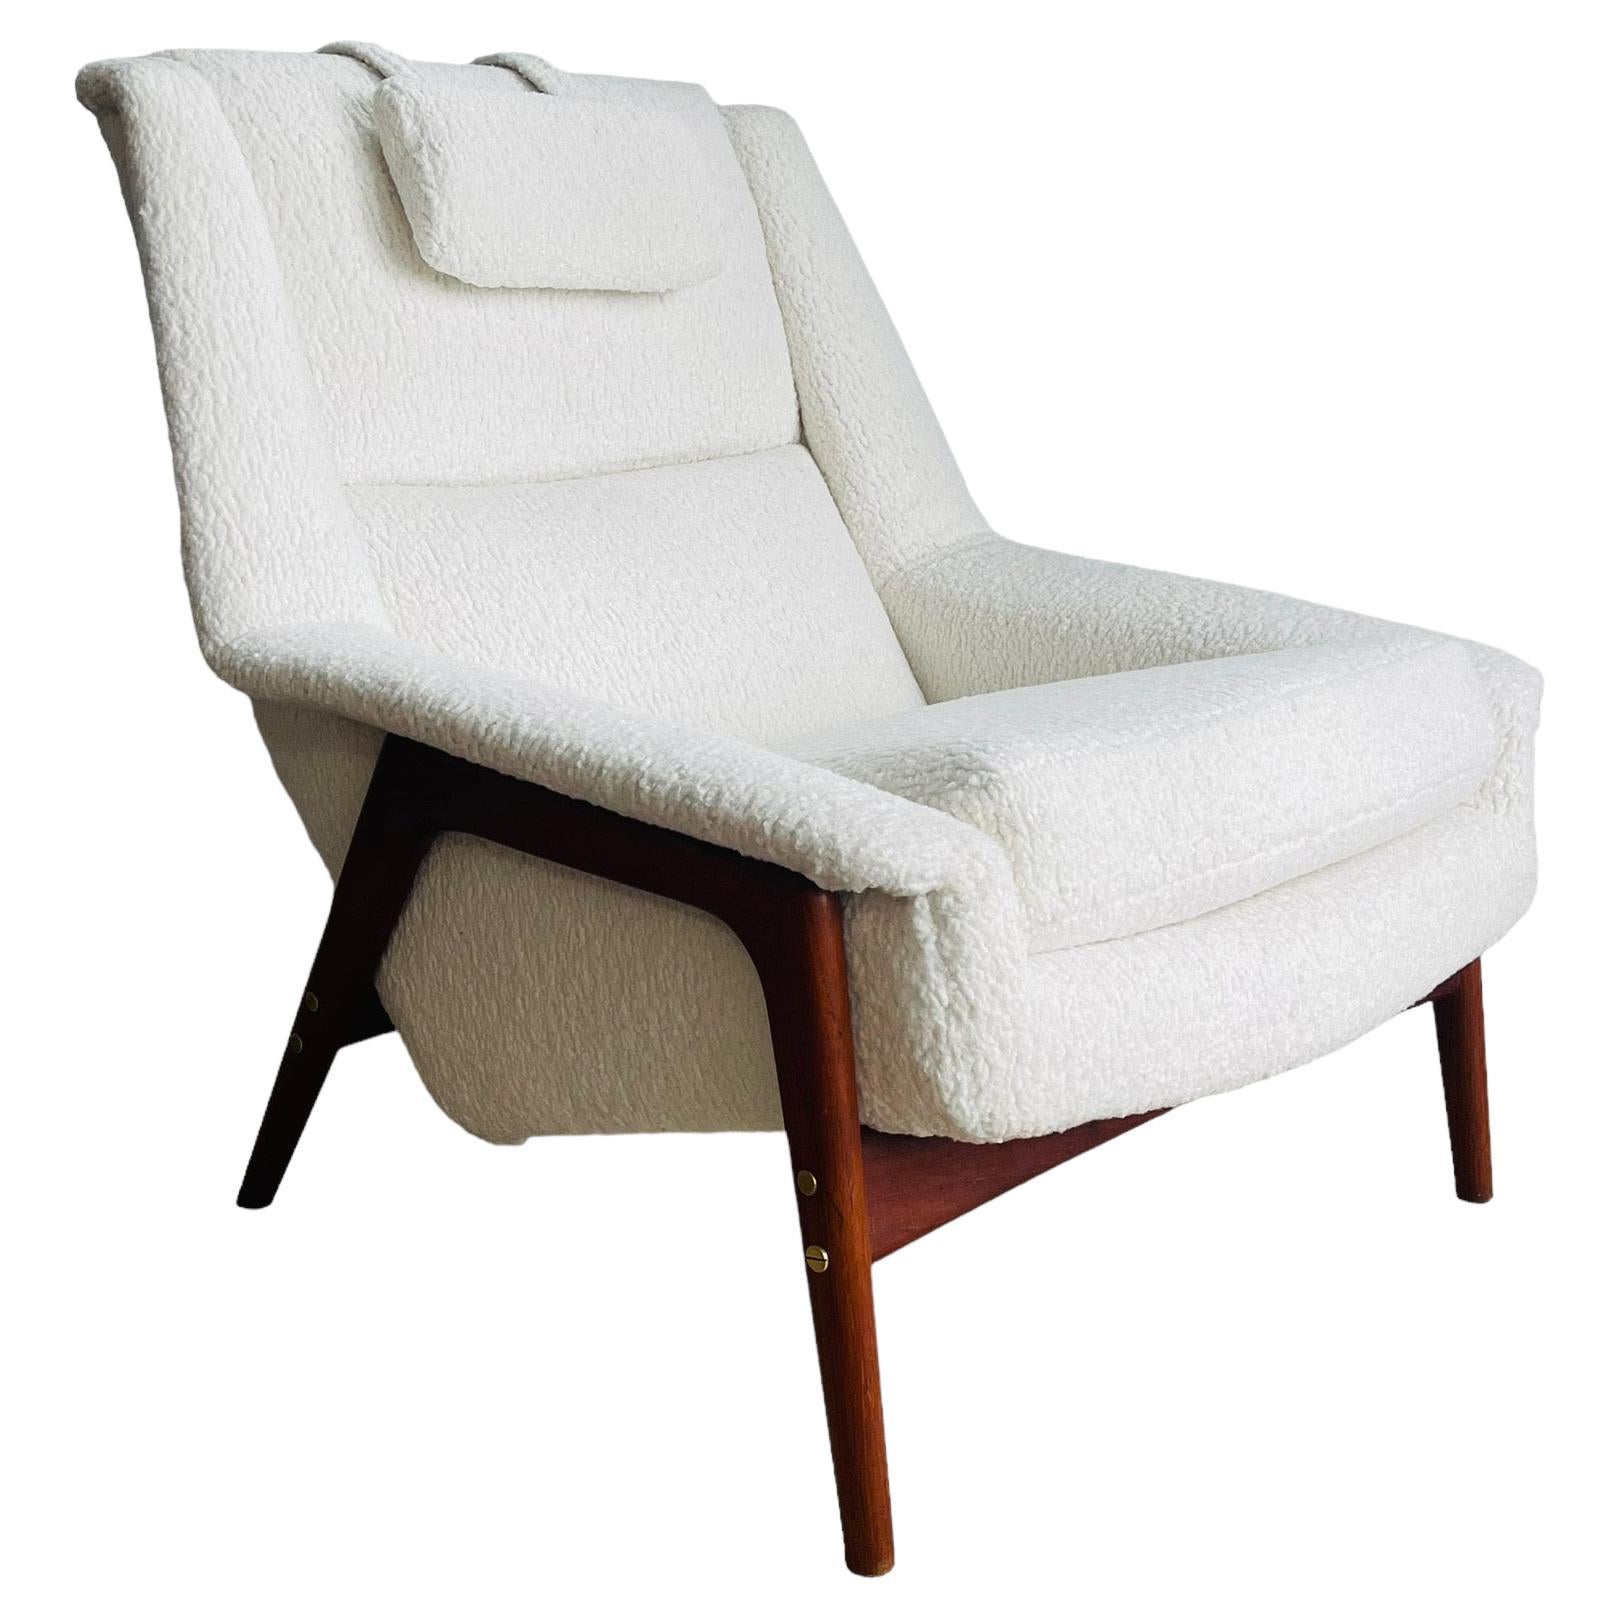 Stunning Mid-Century Modern lounge chair designed by Folke Ohlsson for DUX. This beautiful chair has been fully reupholstered and reupholstered in a sheepskin bouclé fabric. The chair has a sleek walnut frame with adjustable pillow and would be a